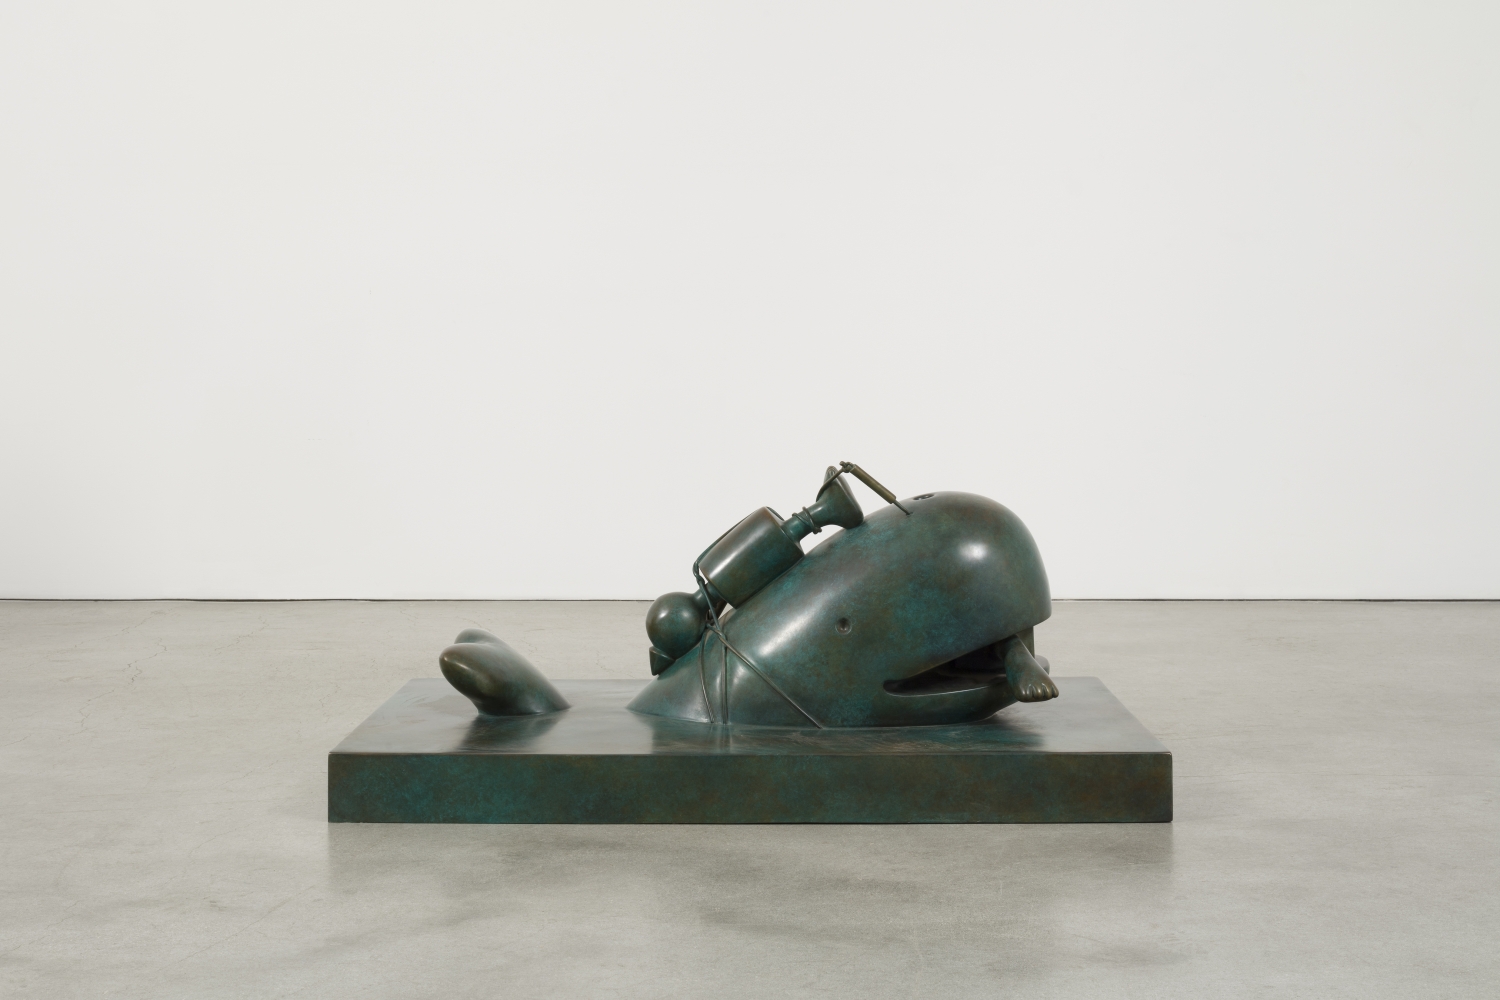 Tom Otterness

Moby Dick, 2002

bronze, edition of 3

19 x 28 x 48 in. / 48.3 x 71.1 x 121.9 cm